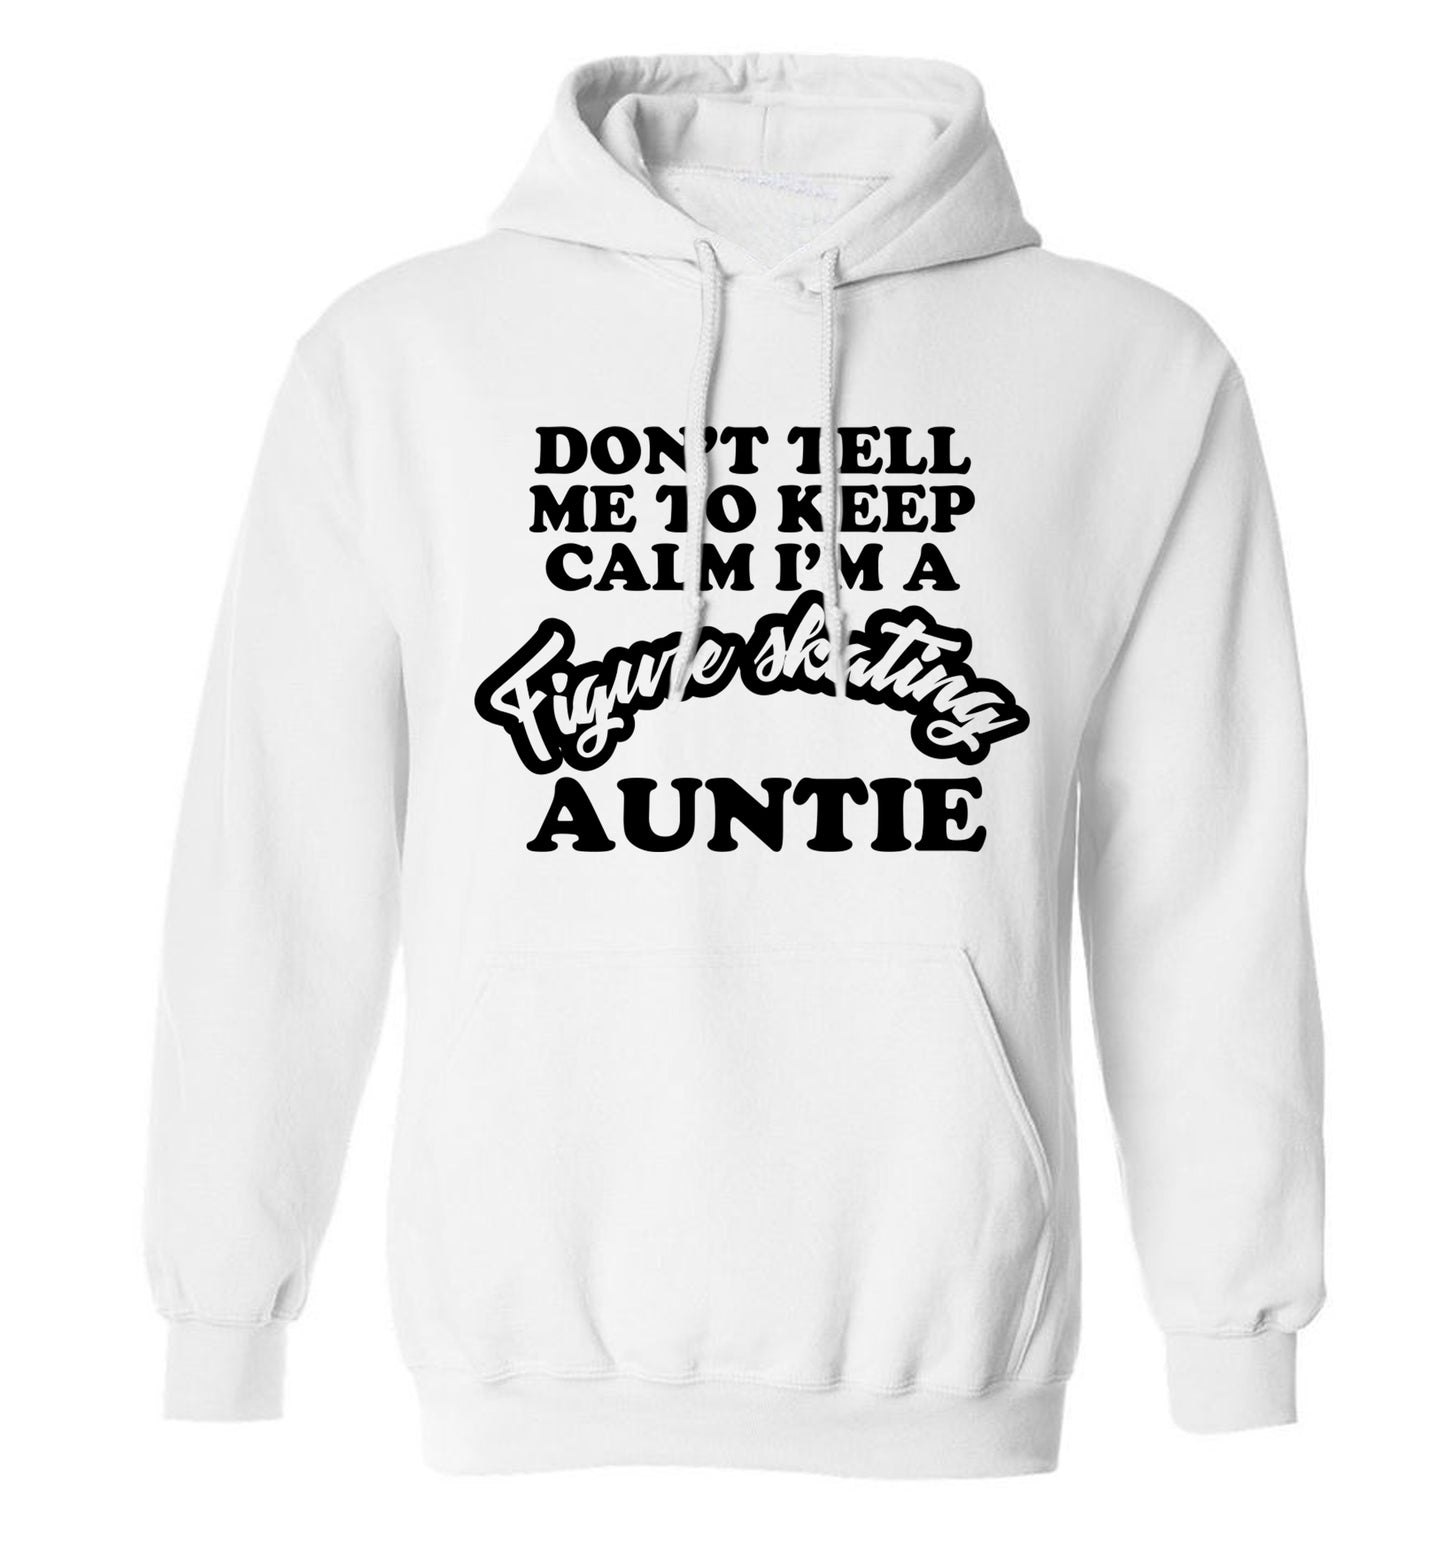 Don't tell me to keep calm I'm a figure skating auntie adults unisexwhite hoodie 2XL